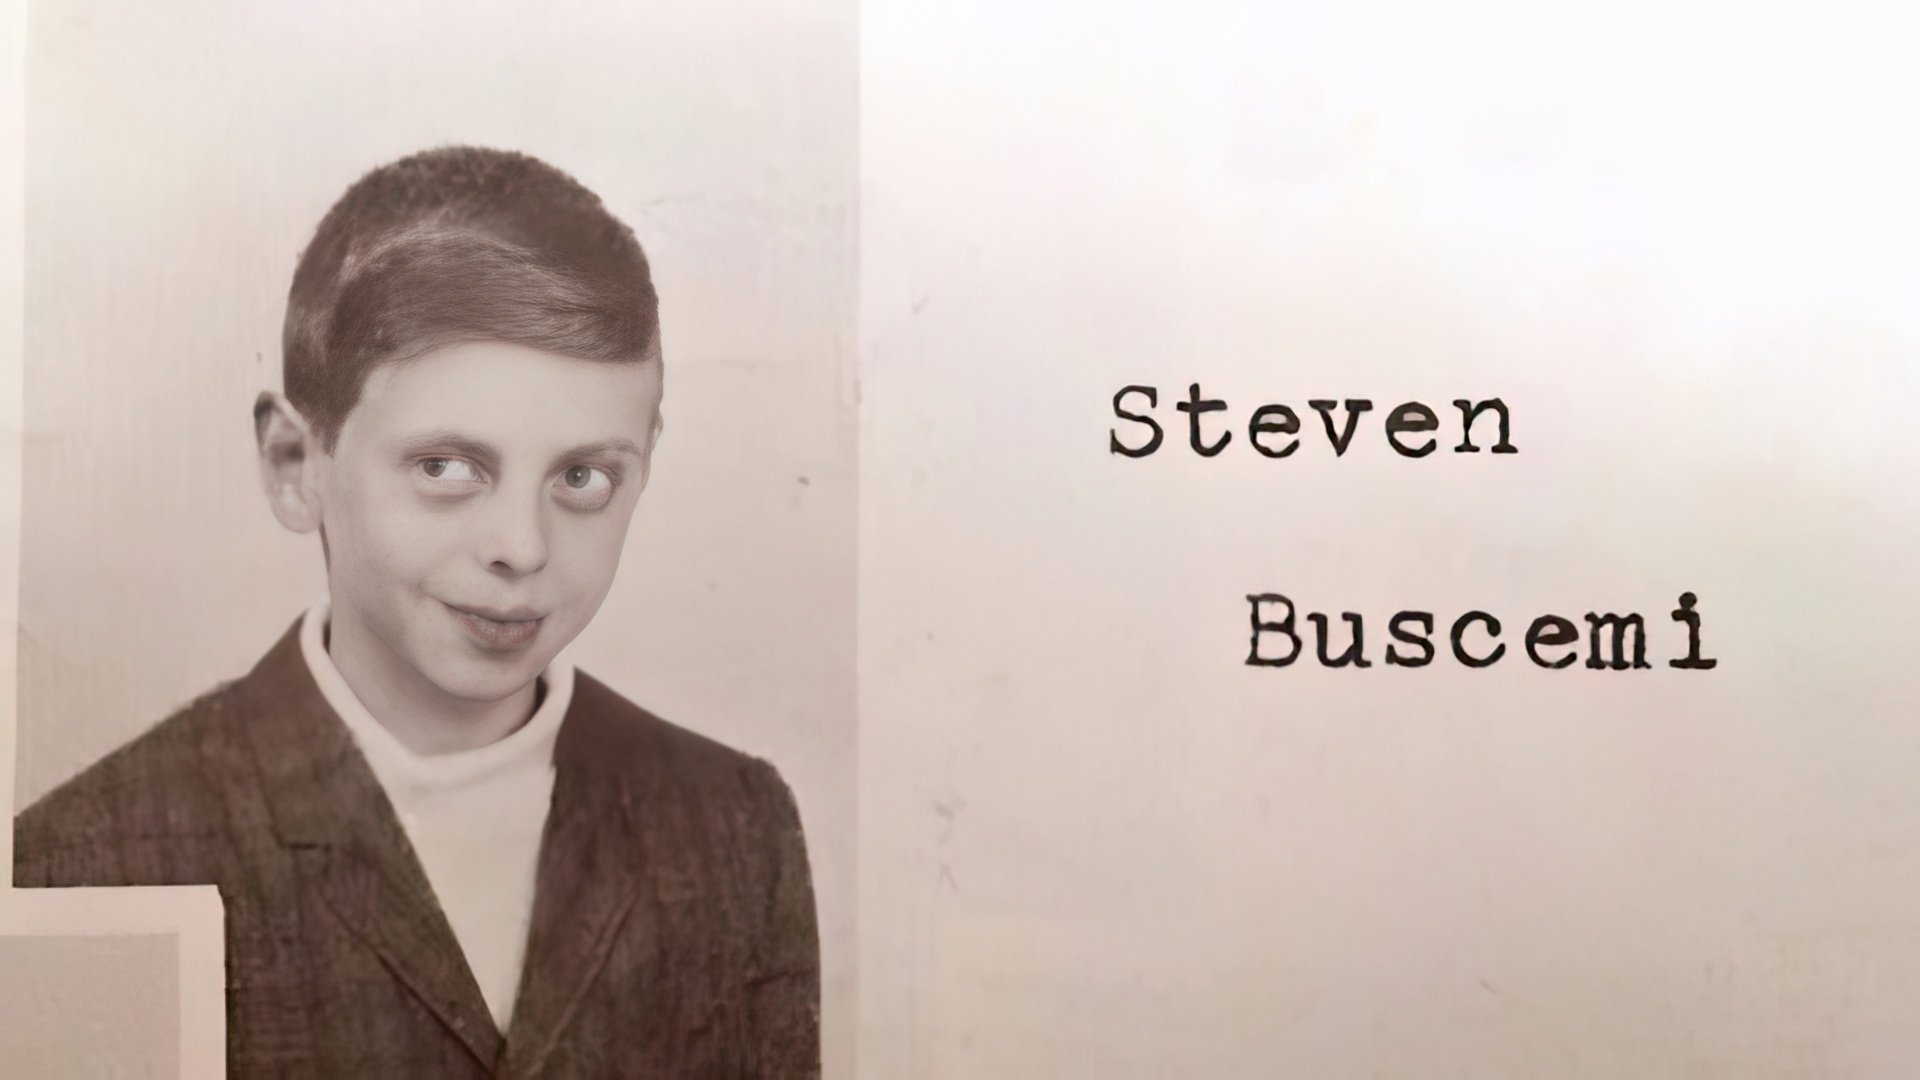 Steve Buscemi in childhood (photo from the school album)